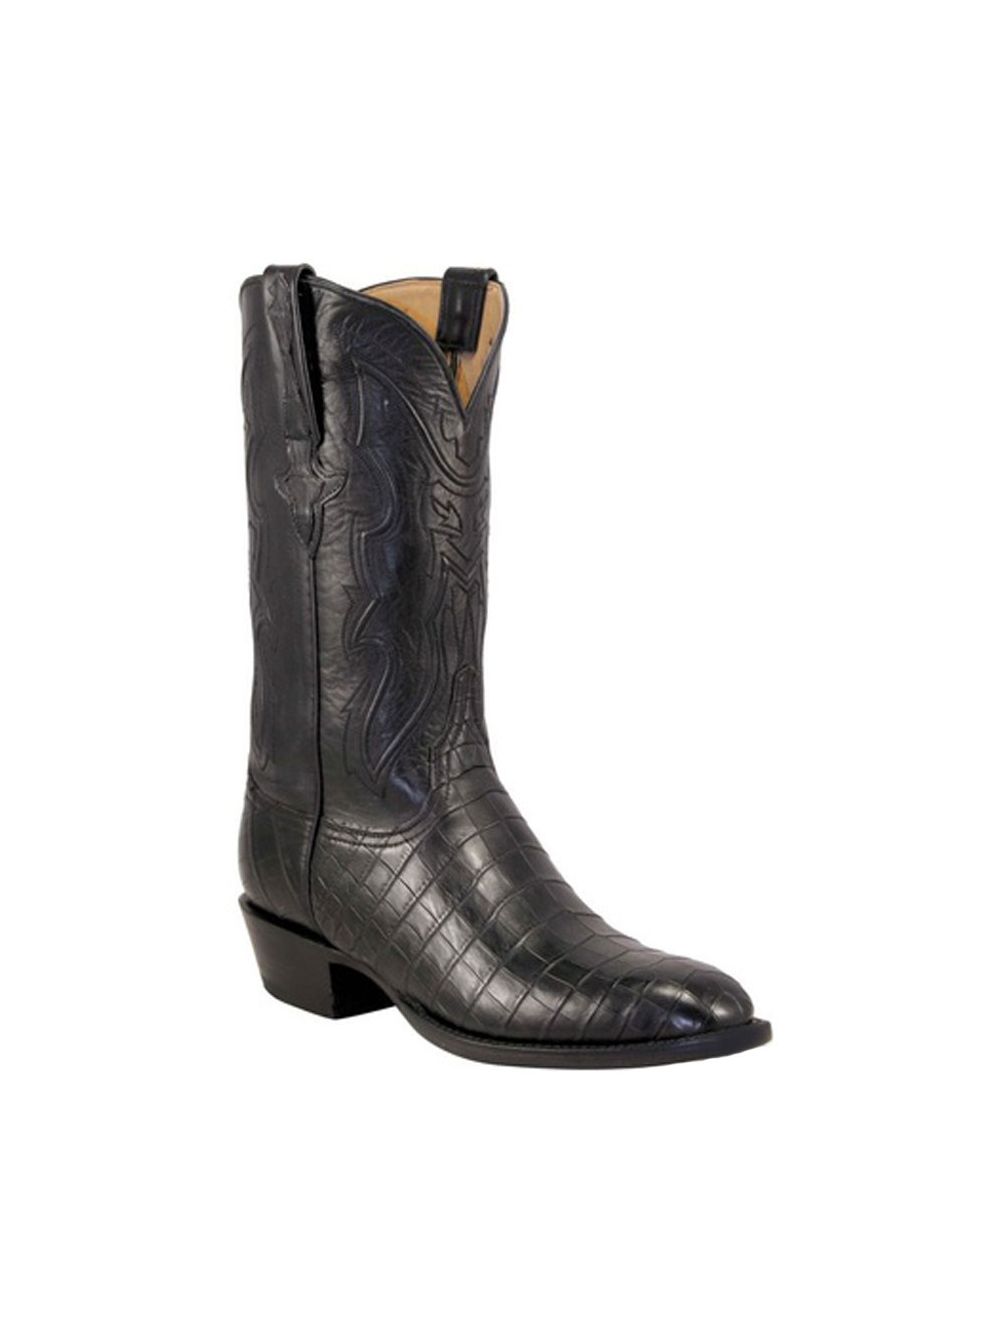 Lucchese Classics L1371 Men's Black Nile Belly Crocodile Boots